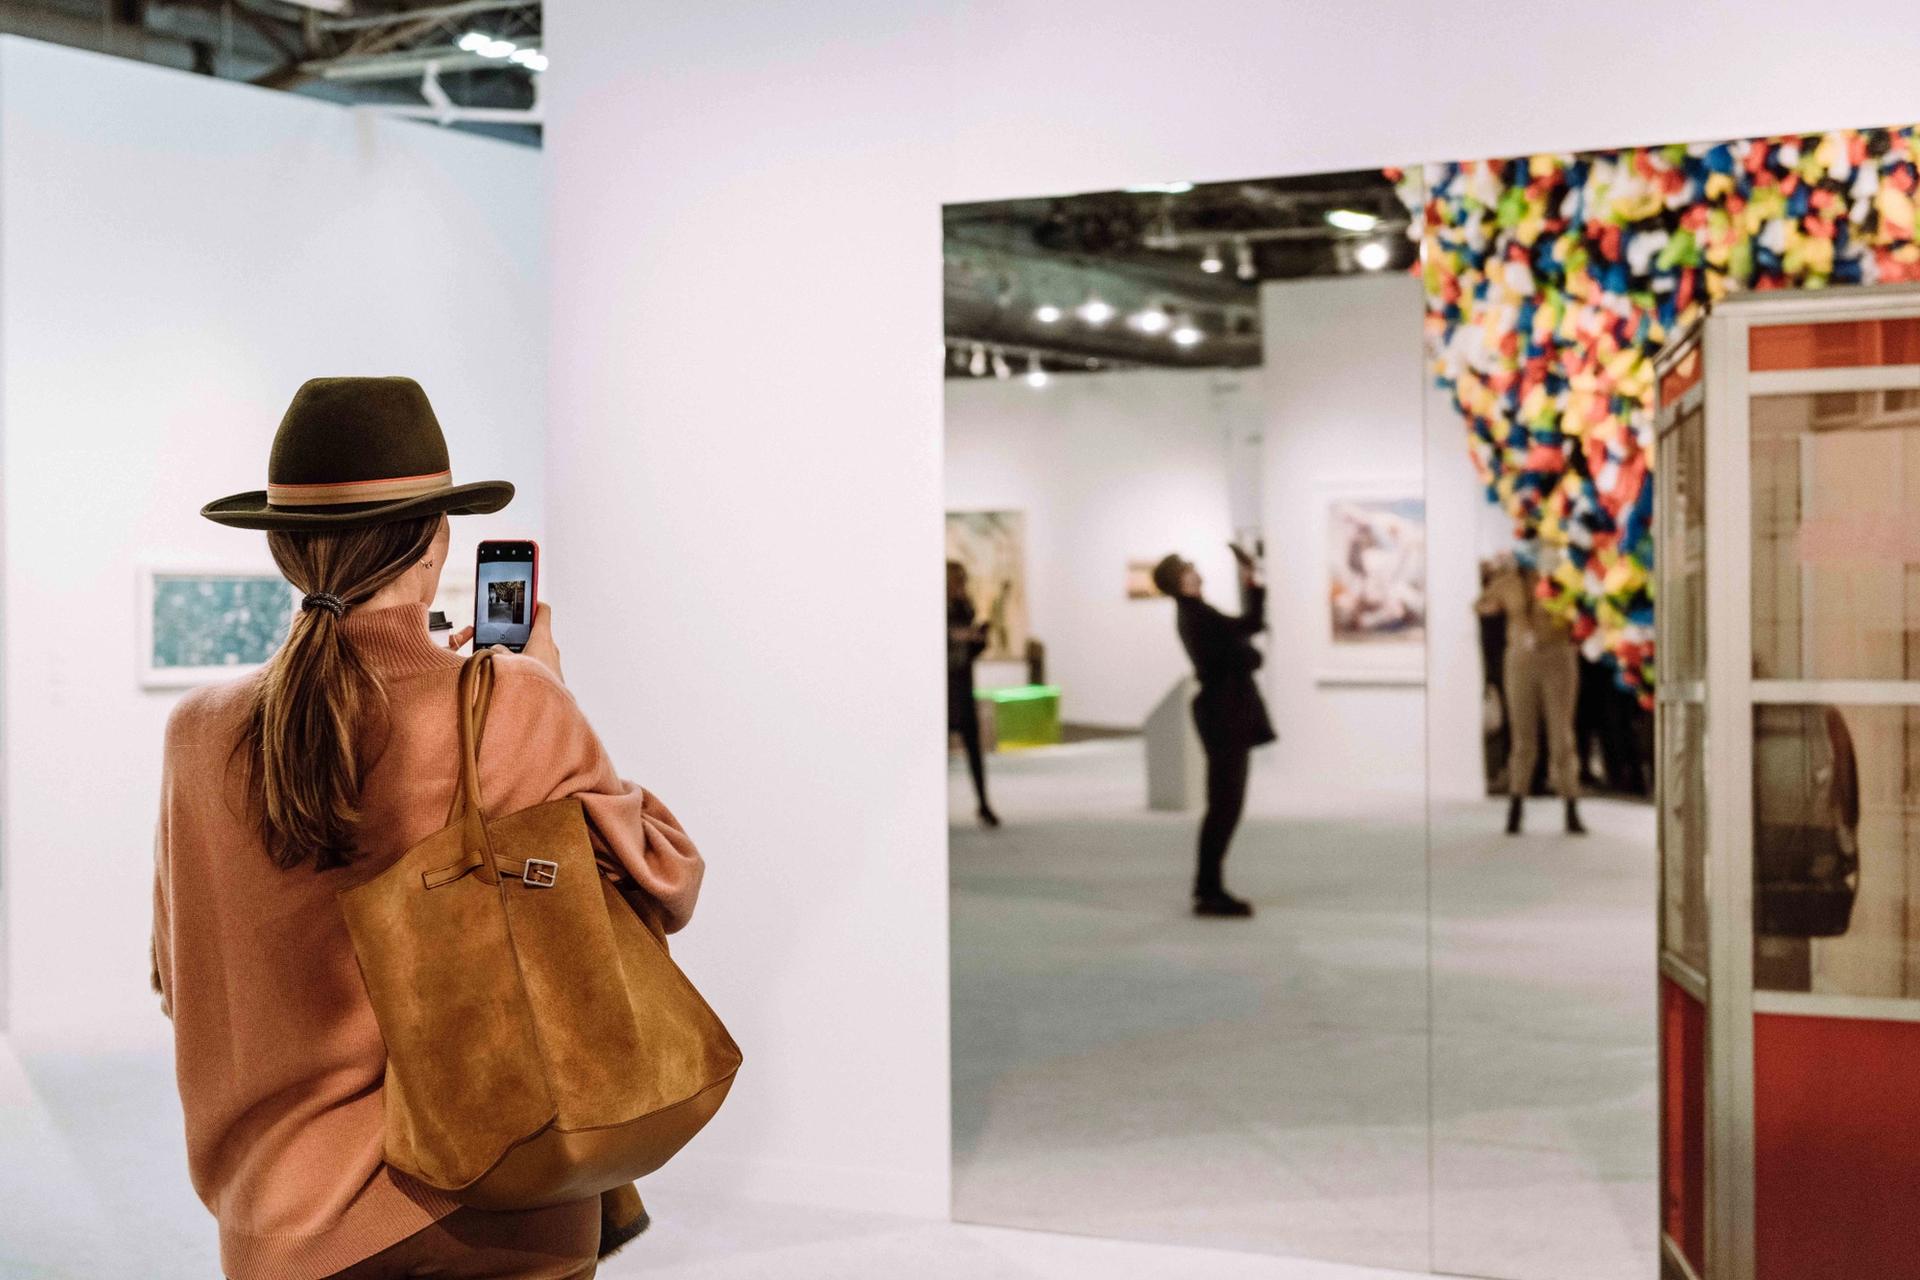 Taking advantage of shiny things and selfie opportunities at the Armory Show Photo by Teddy Wolff. Courtesy of the Armory Show